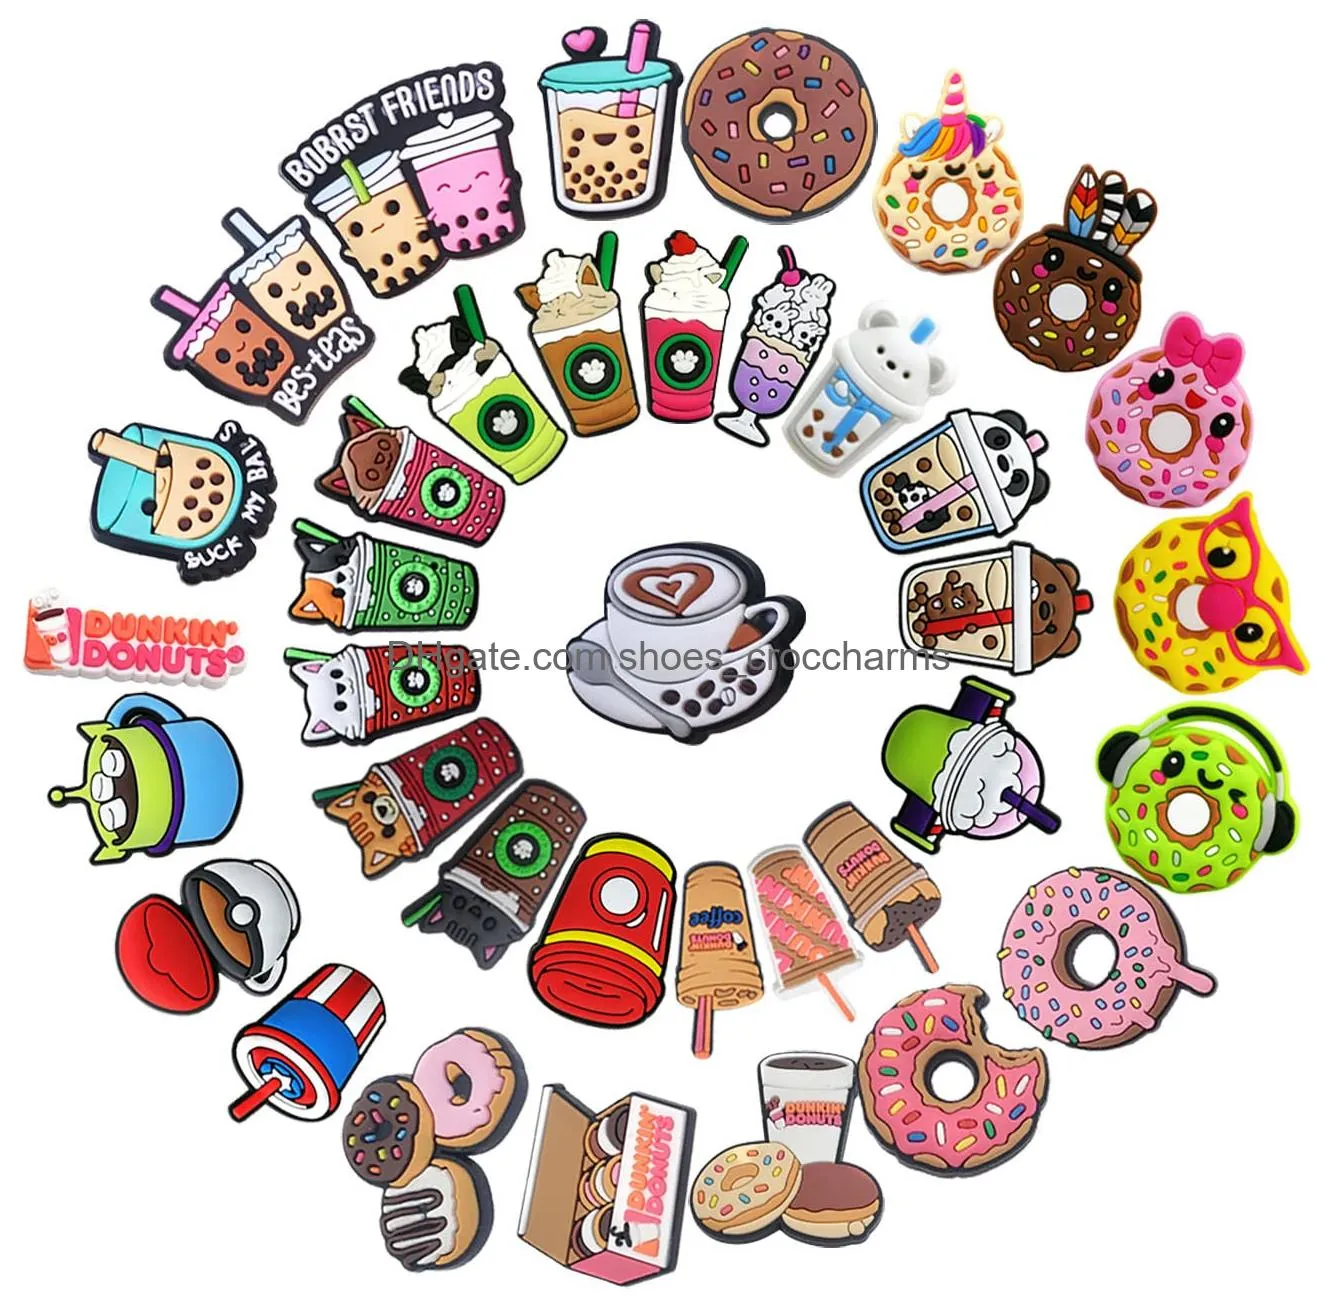 16/30/35/ shoe charms for clog clog sandals bands wristbands pvc cute charms decoration for grils kids party favors birthday gifts